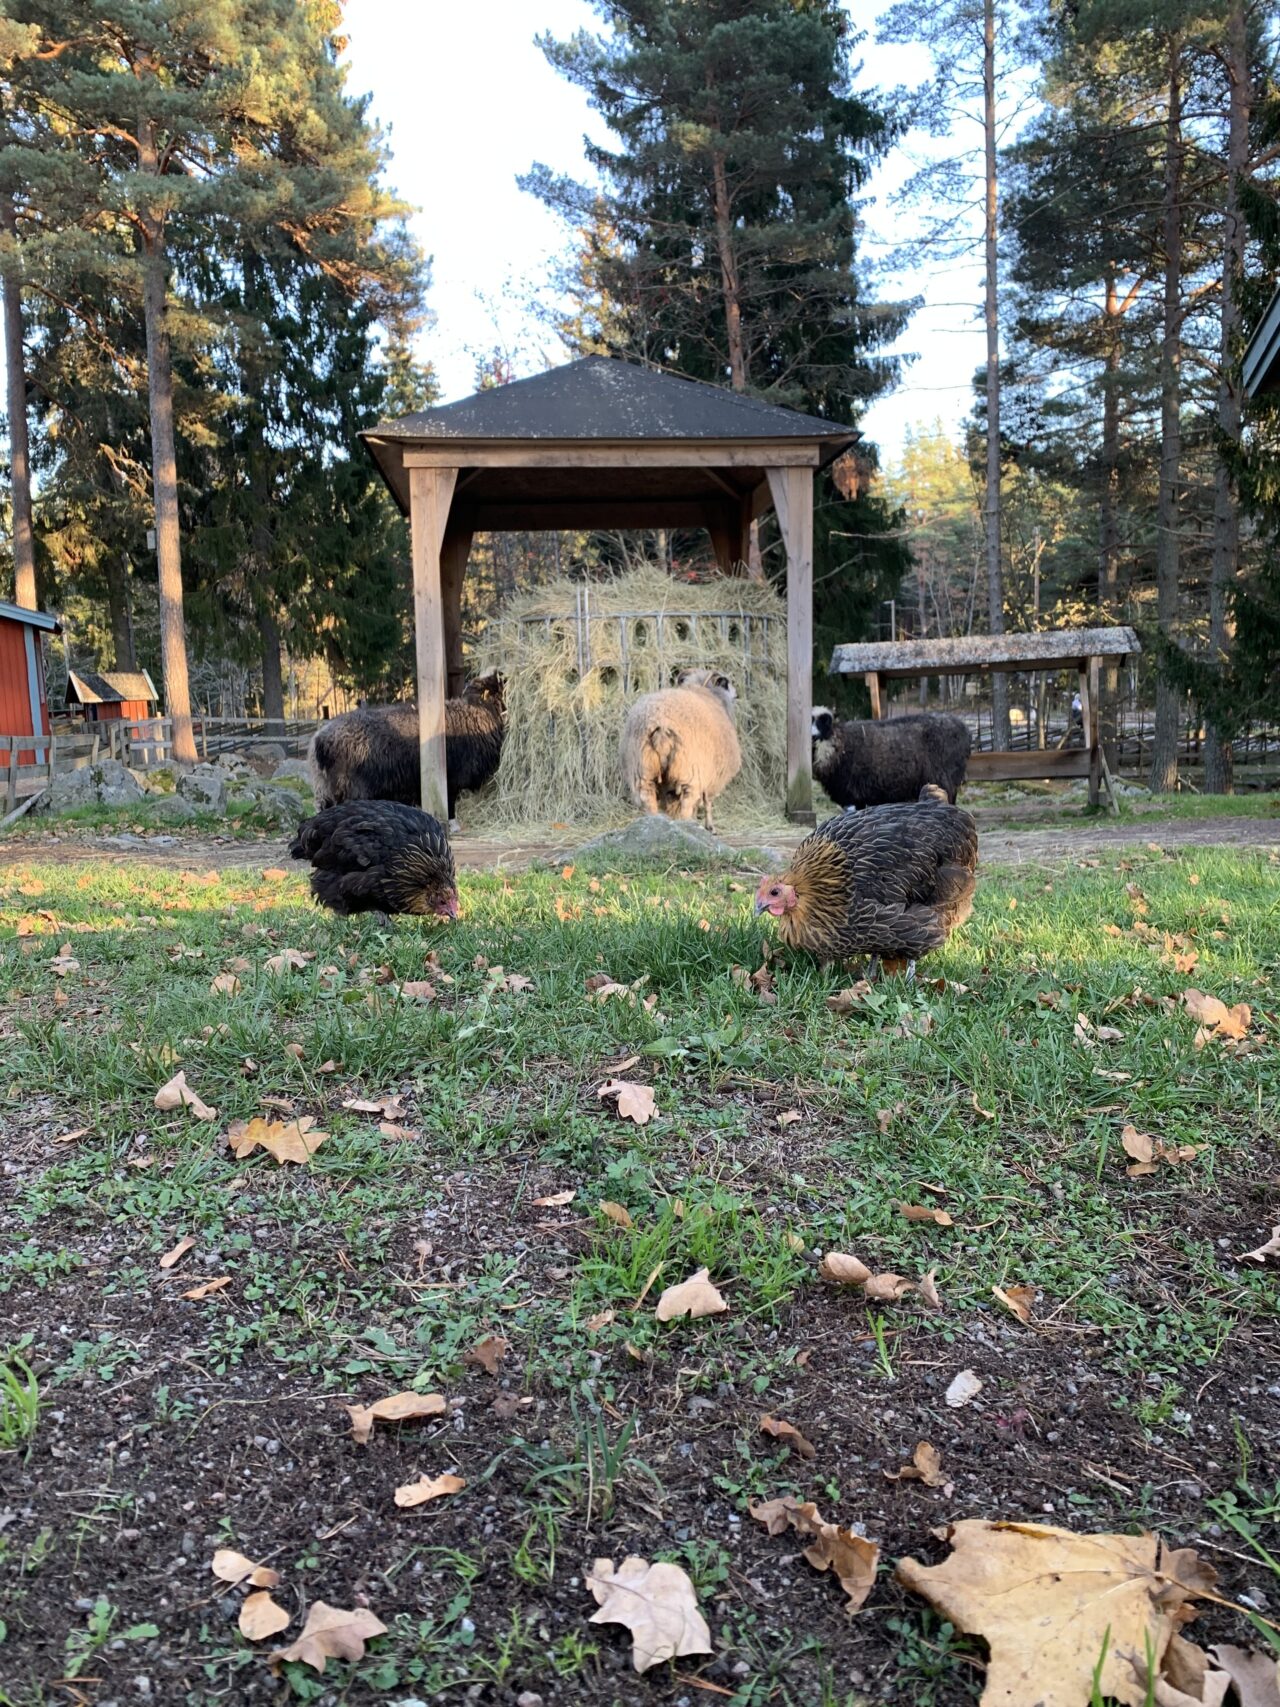 Chickens And Sheep In Front Of A Hay Bale Hut